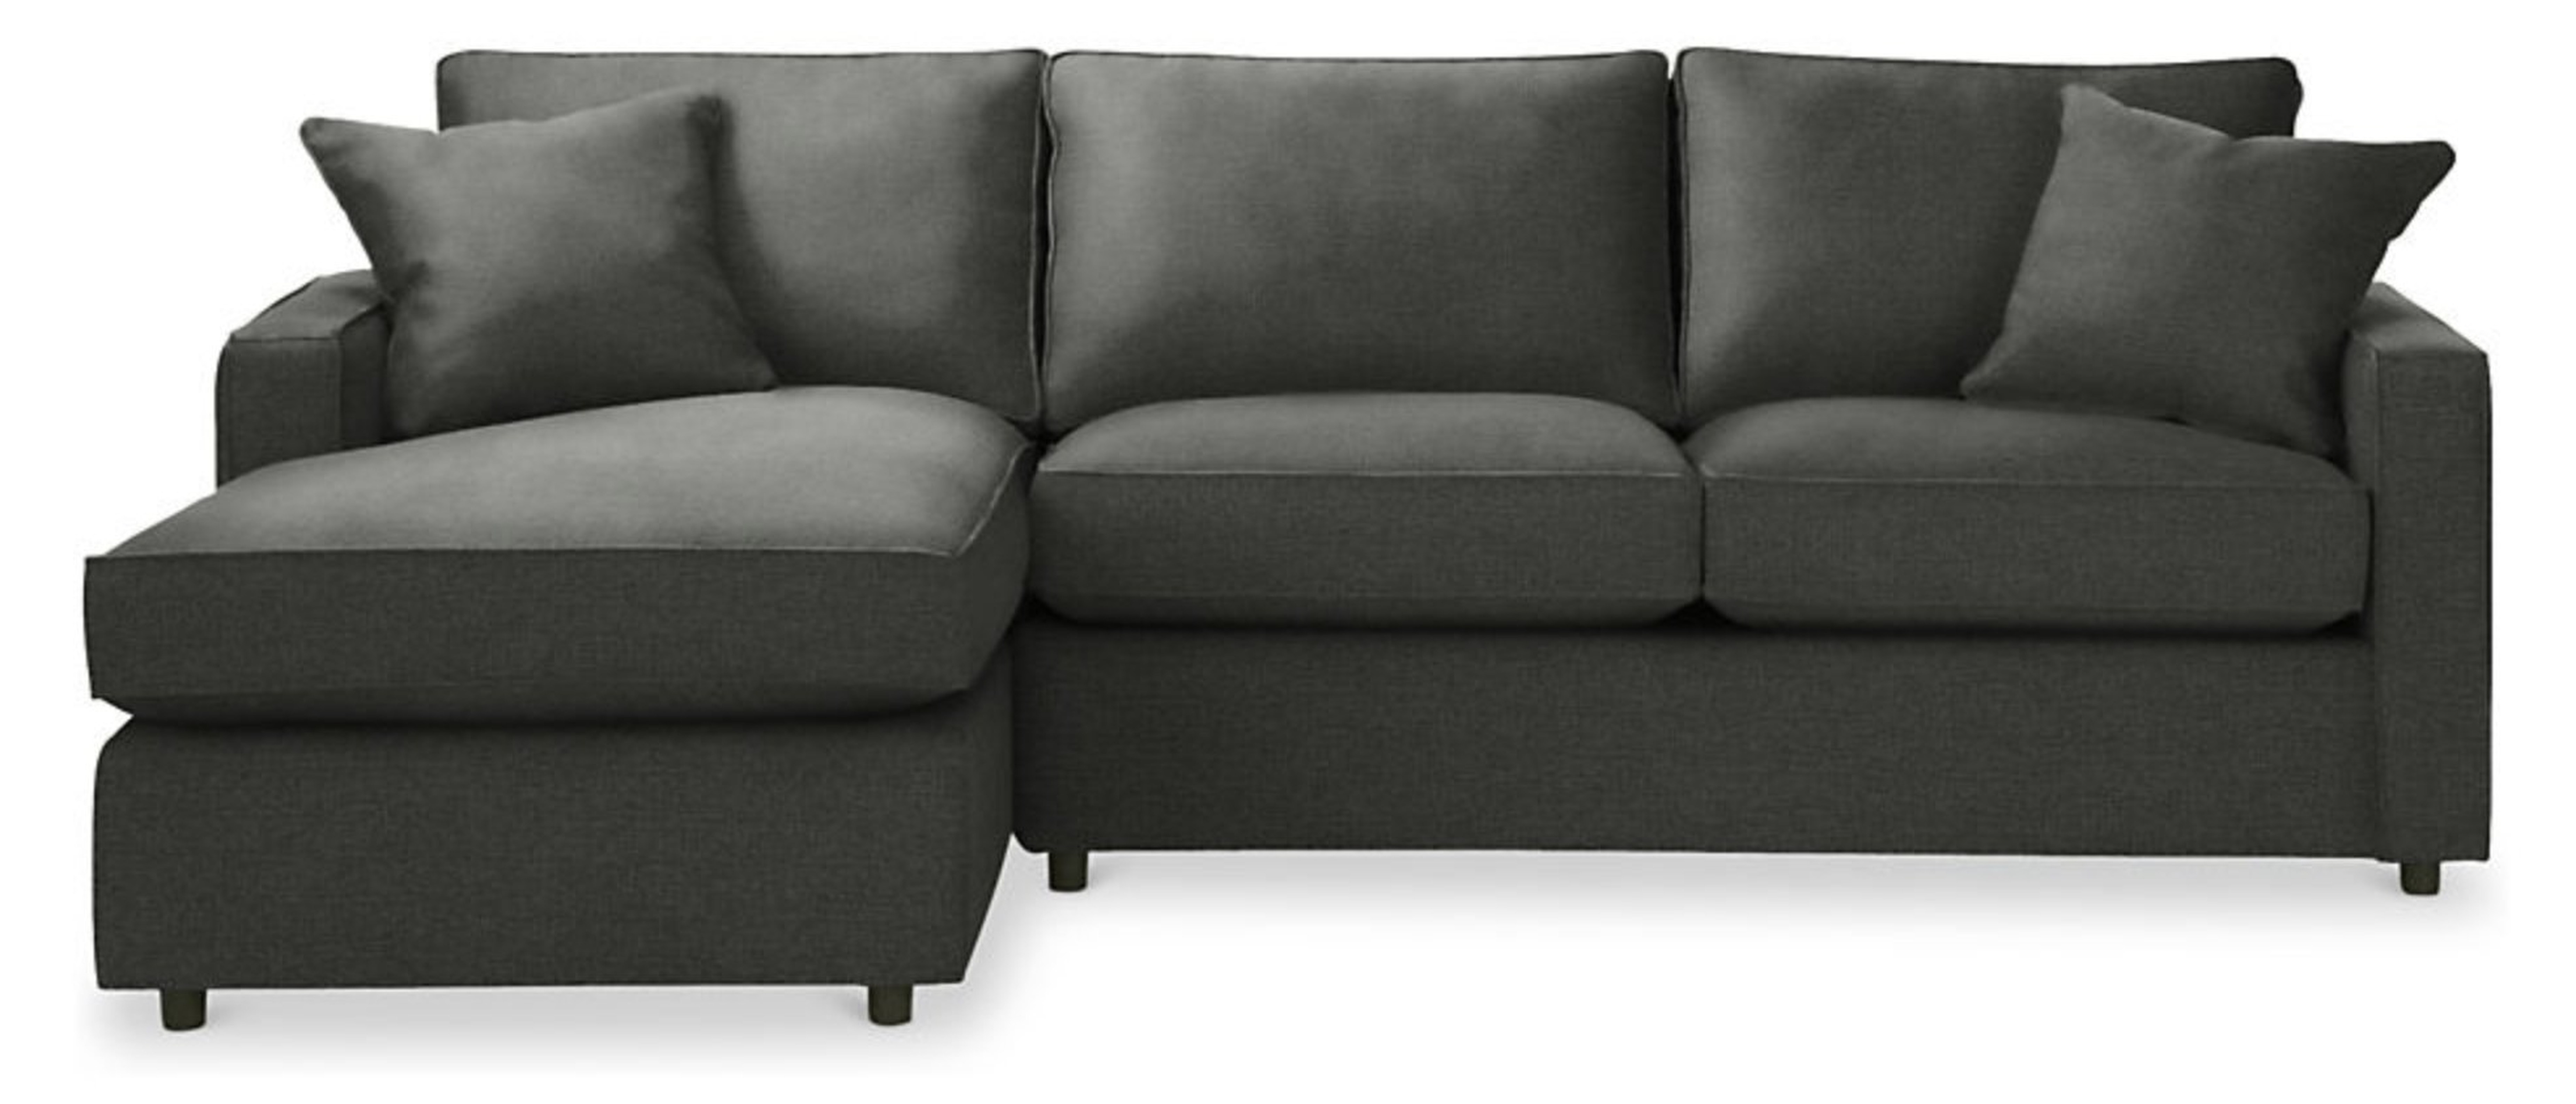 York 95" Sofa with Left-Arm Chaise in Sumner Charcoal Fabric - Room & Board